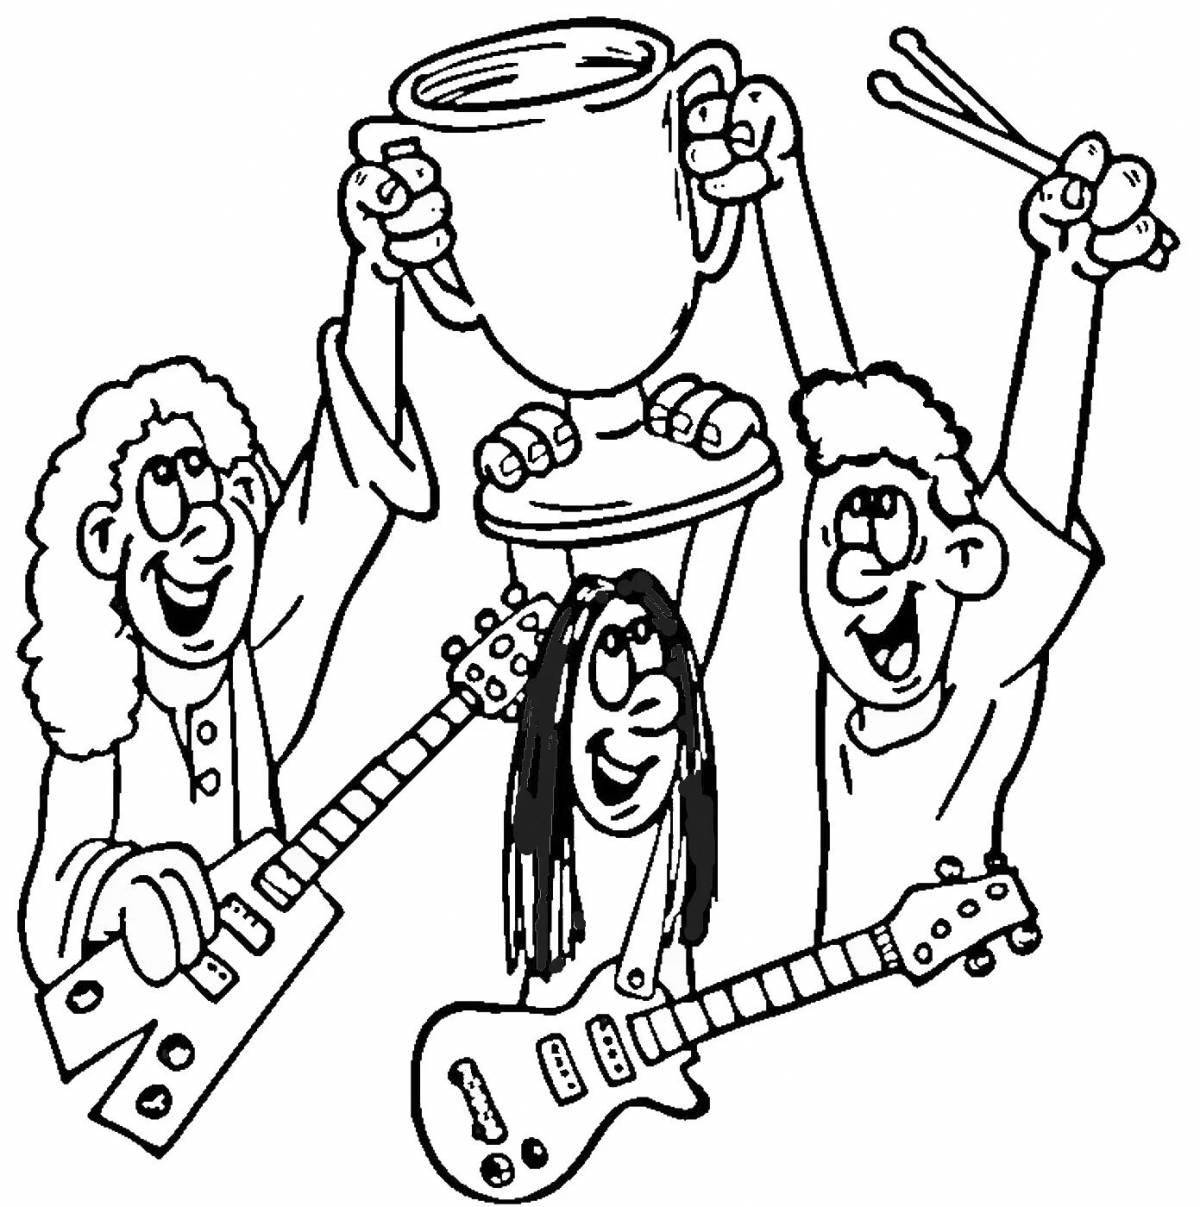 Musician radiant coloring page